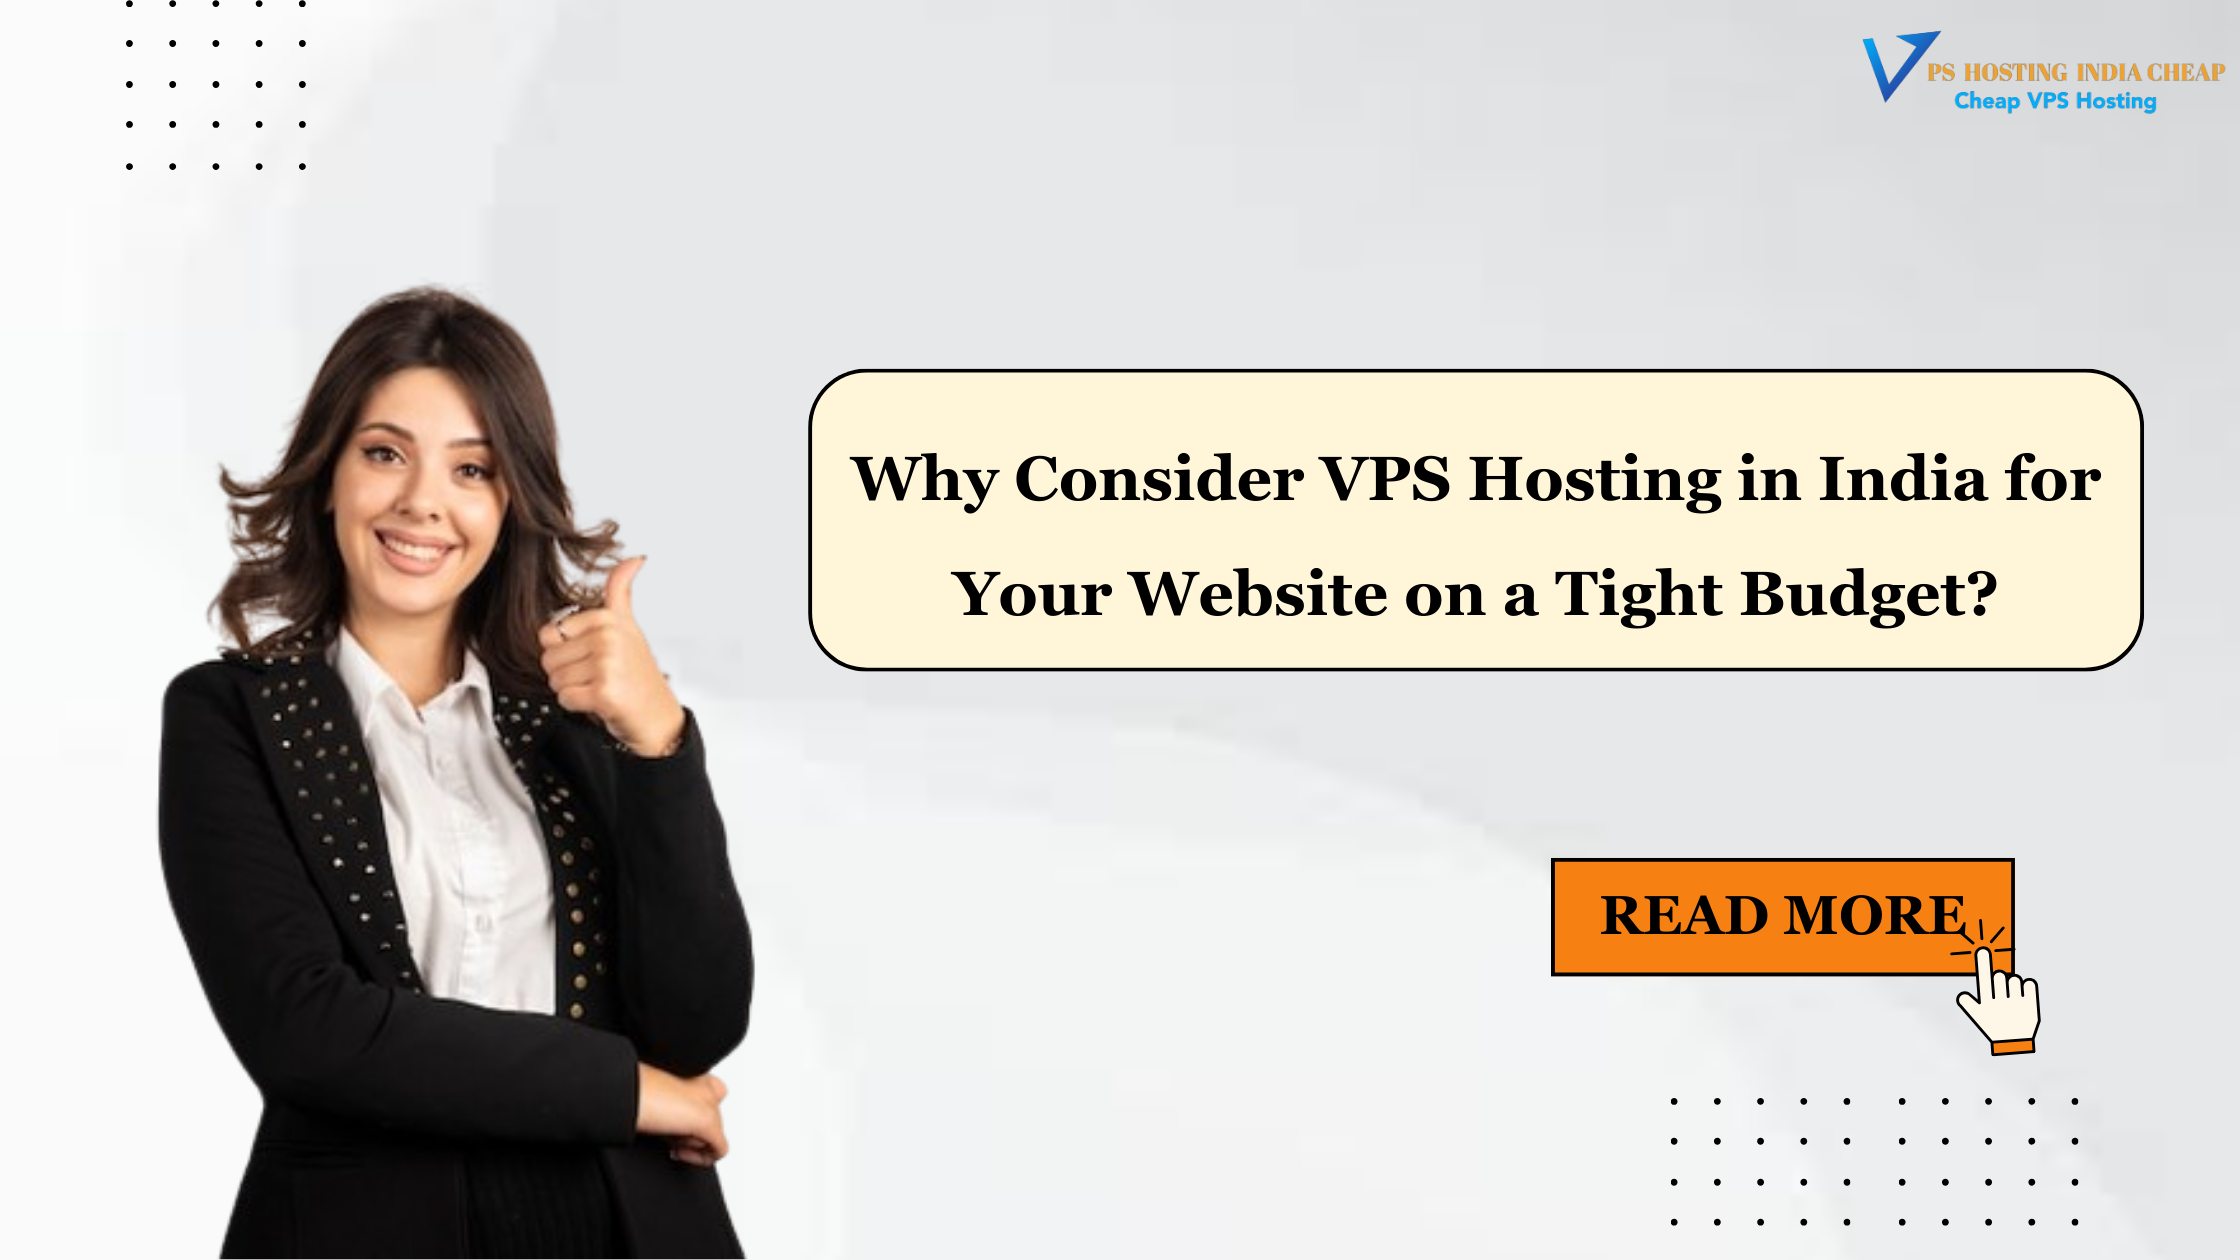 Why Consider VPS Hosting in India for Your Website on a Tight Budget